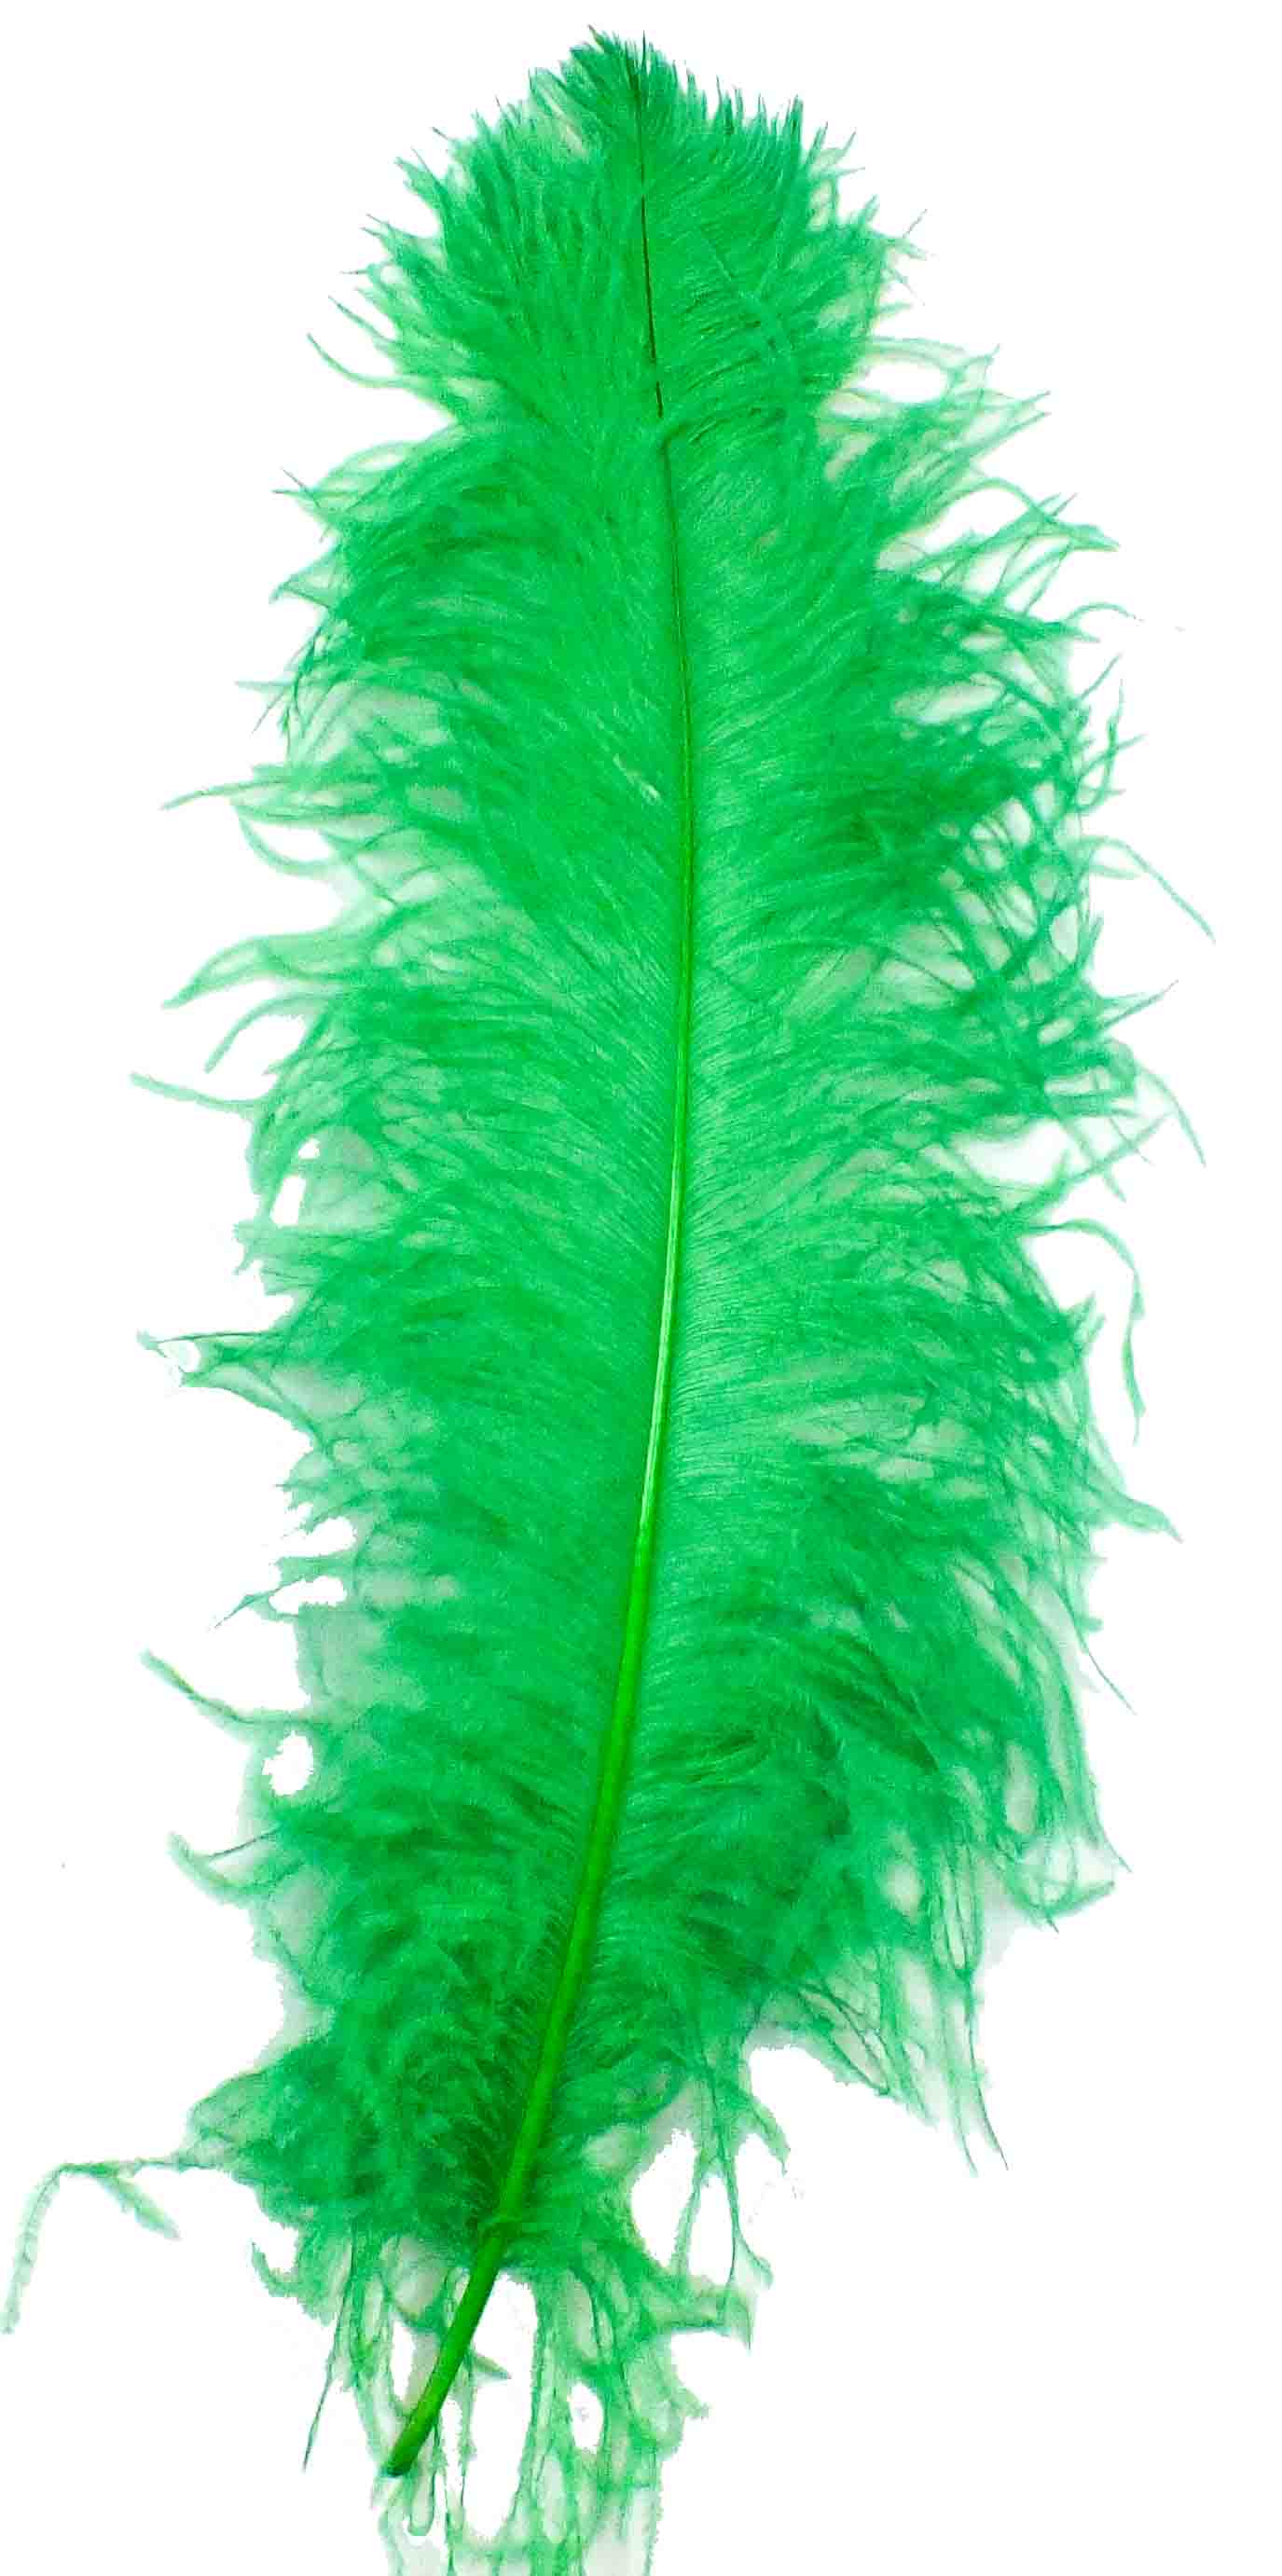 6 Green Feathers - St Patrick's Day